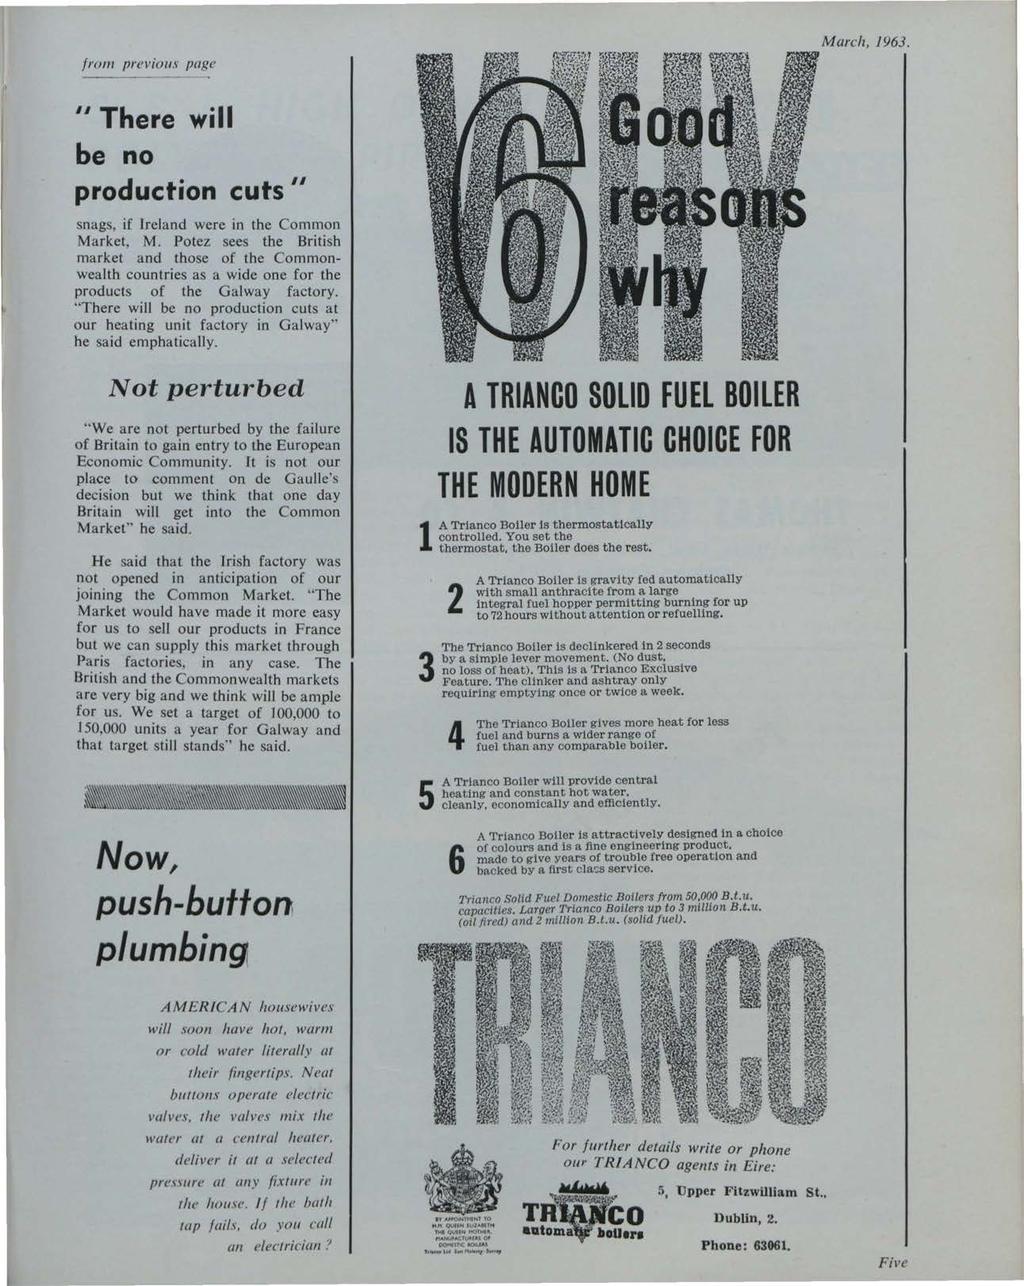 from previous page et al.: The Irish Plumber and Heating Contractor, March 1963 (complete is March, 1963. " There wi II be no production cu t s II snags, if Ireland were in the Common Market, M.